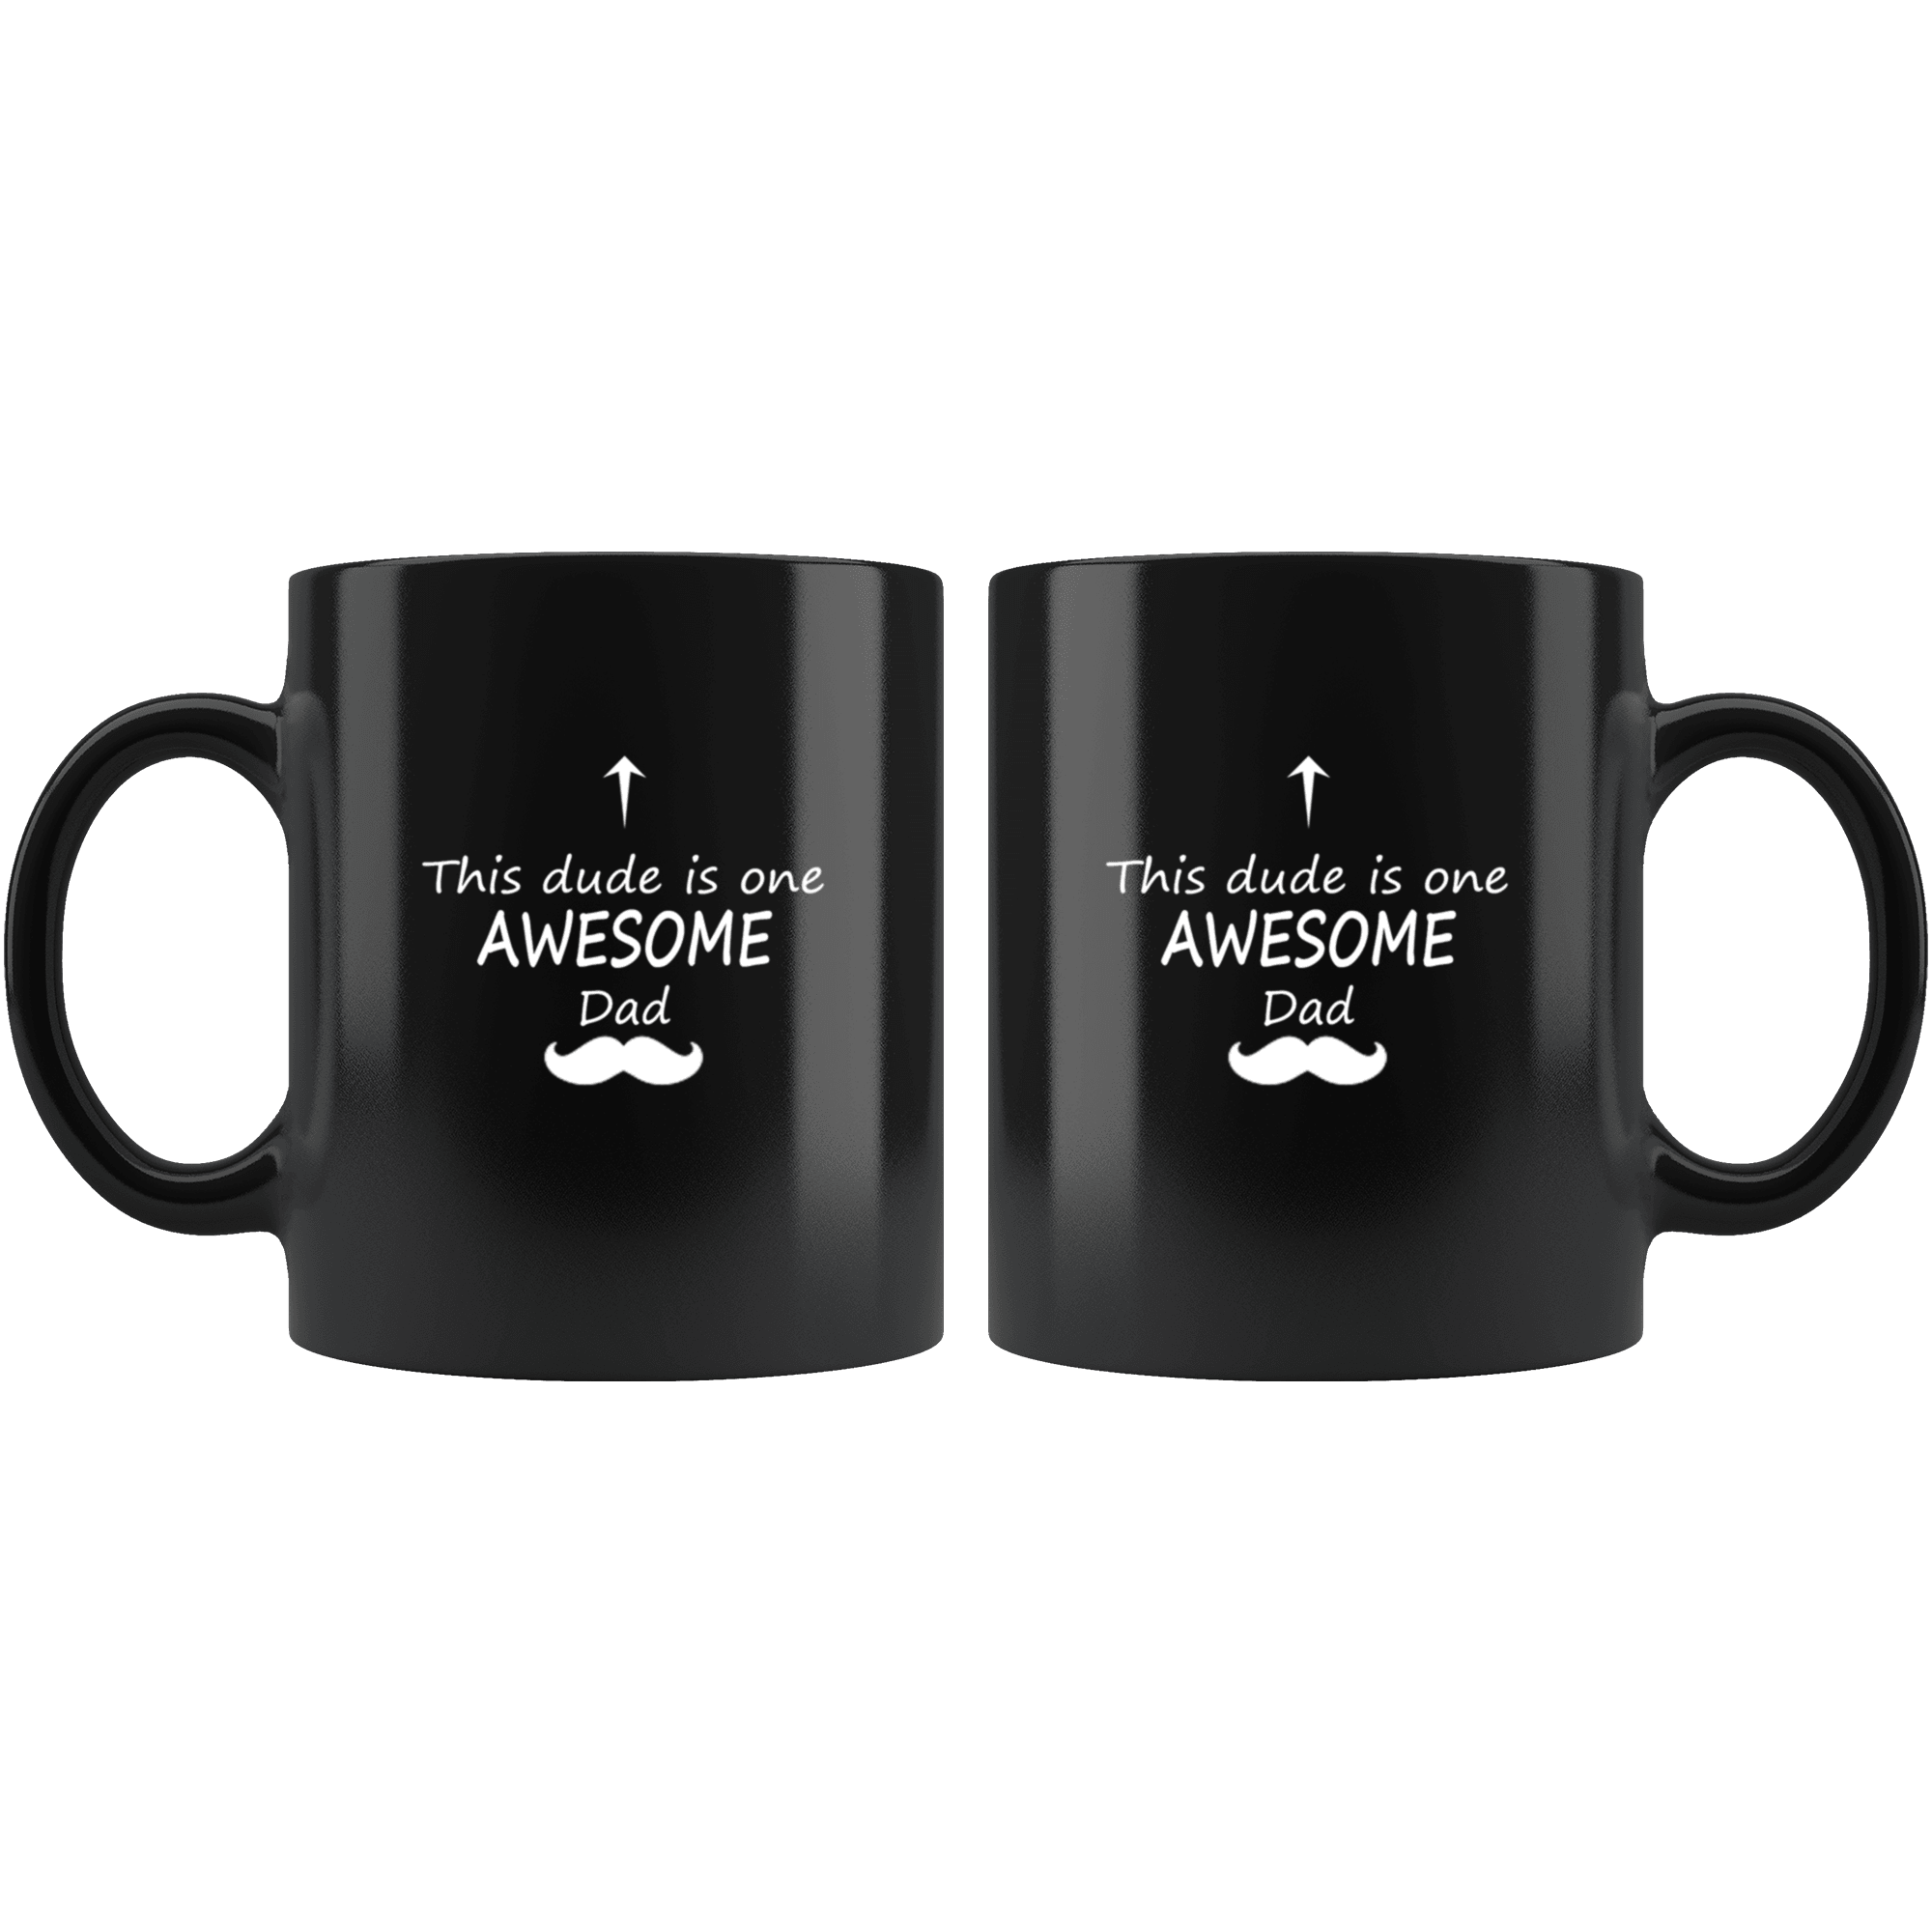 Great Coffee Mug For Father - This Dude Is One AWESOME Dad - P211